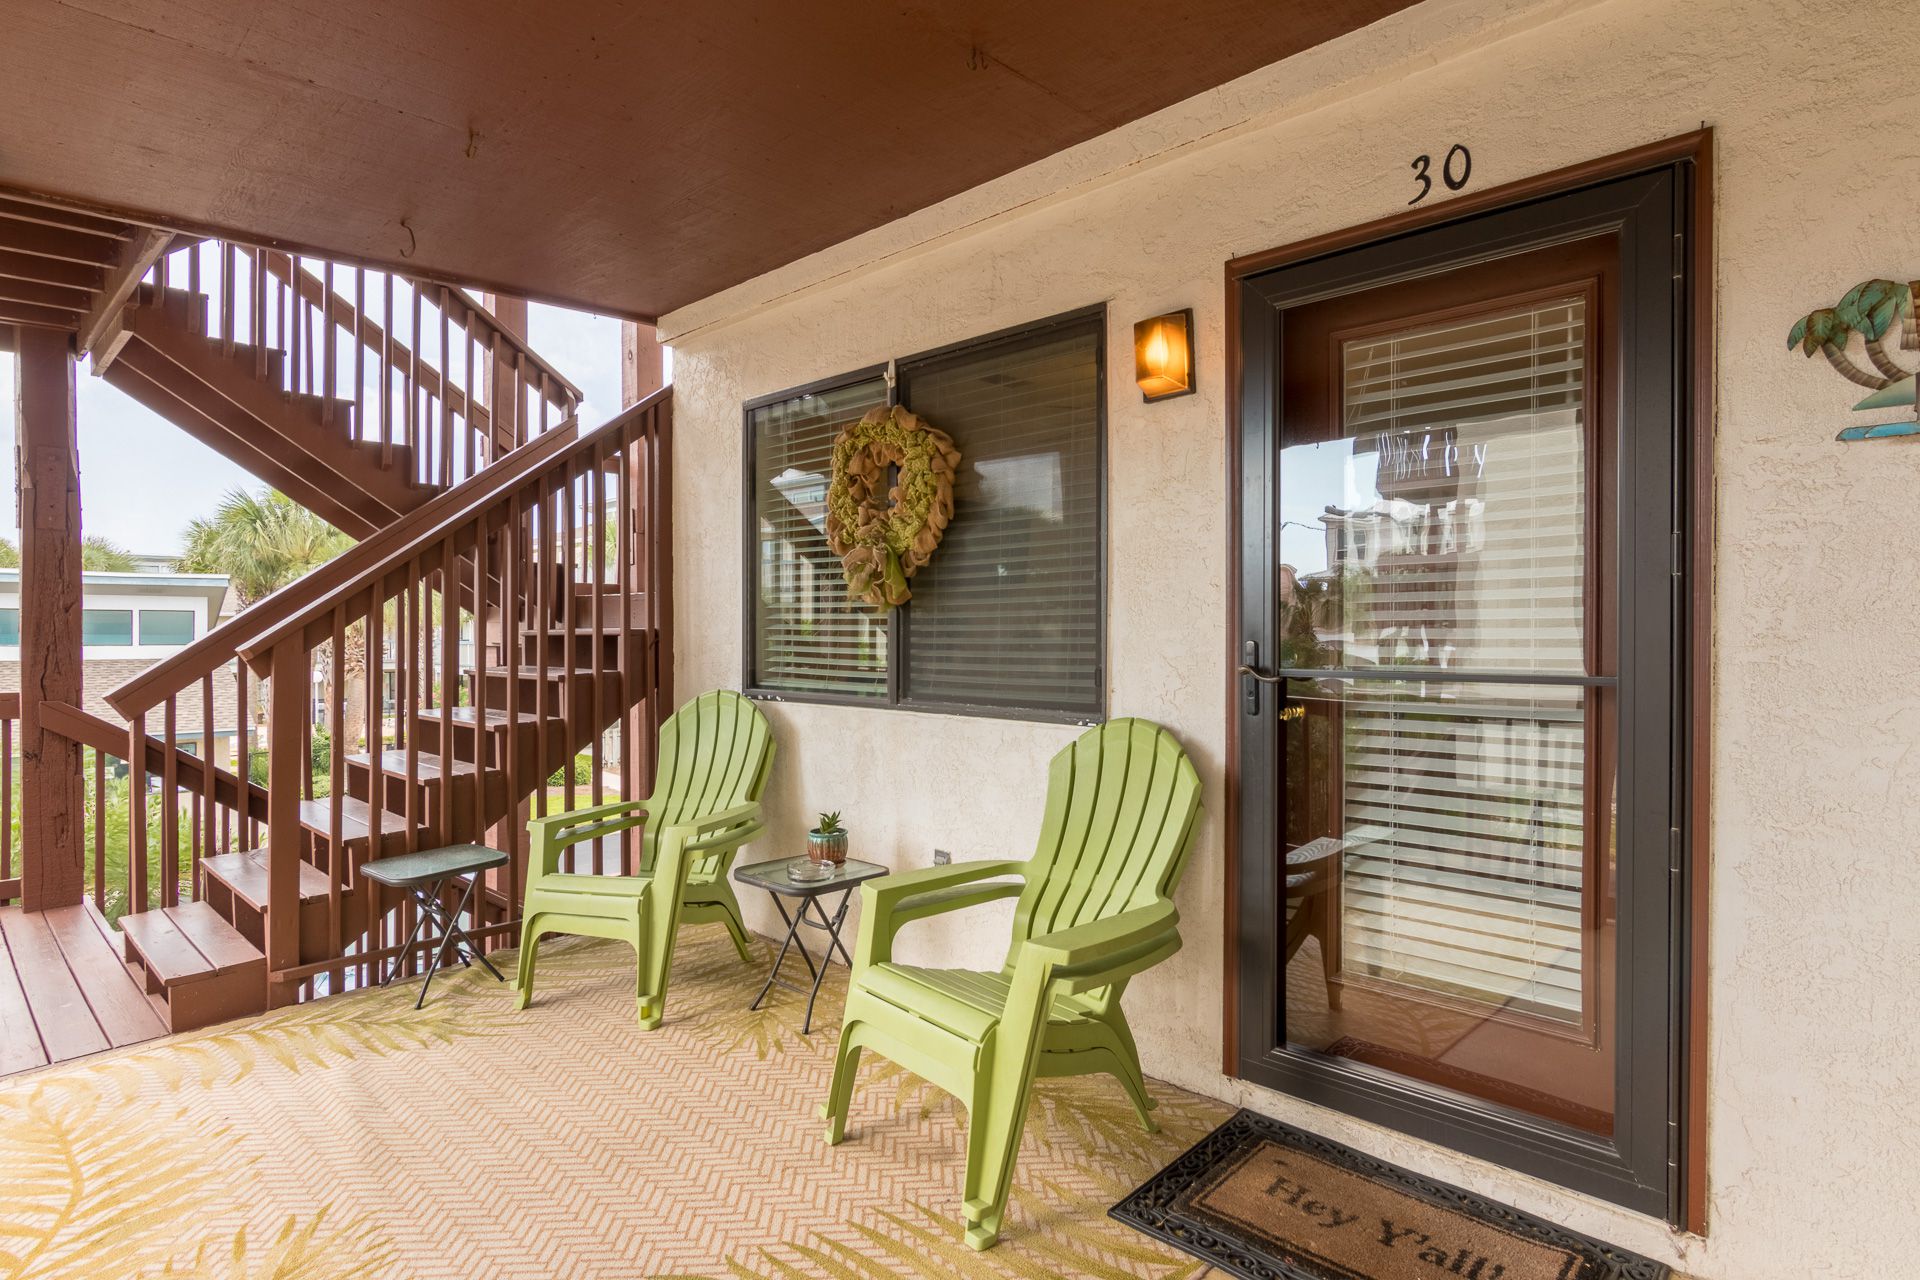 two green chairs on porch by door